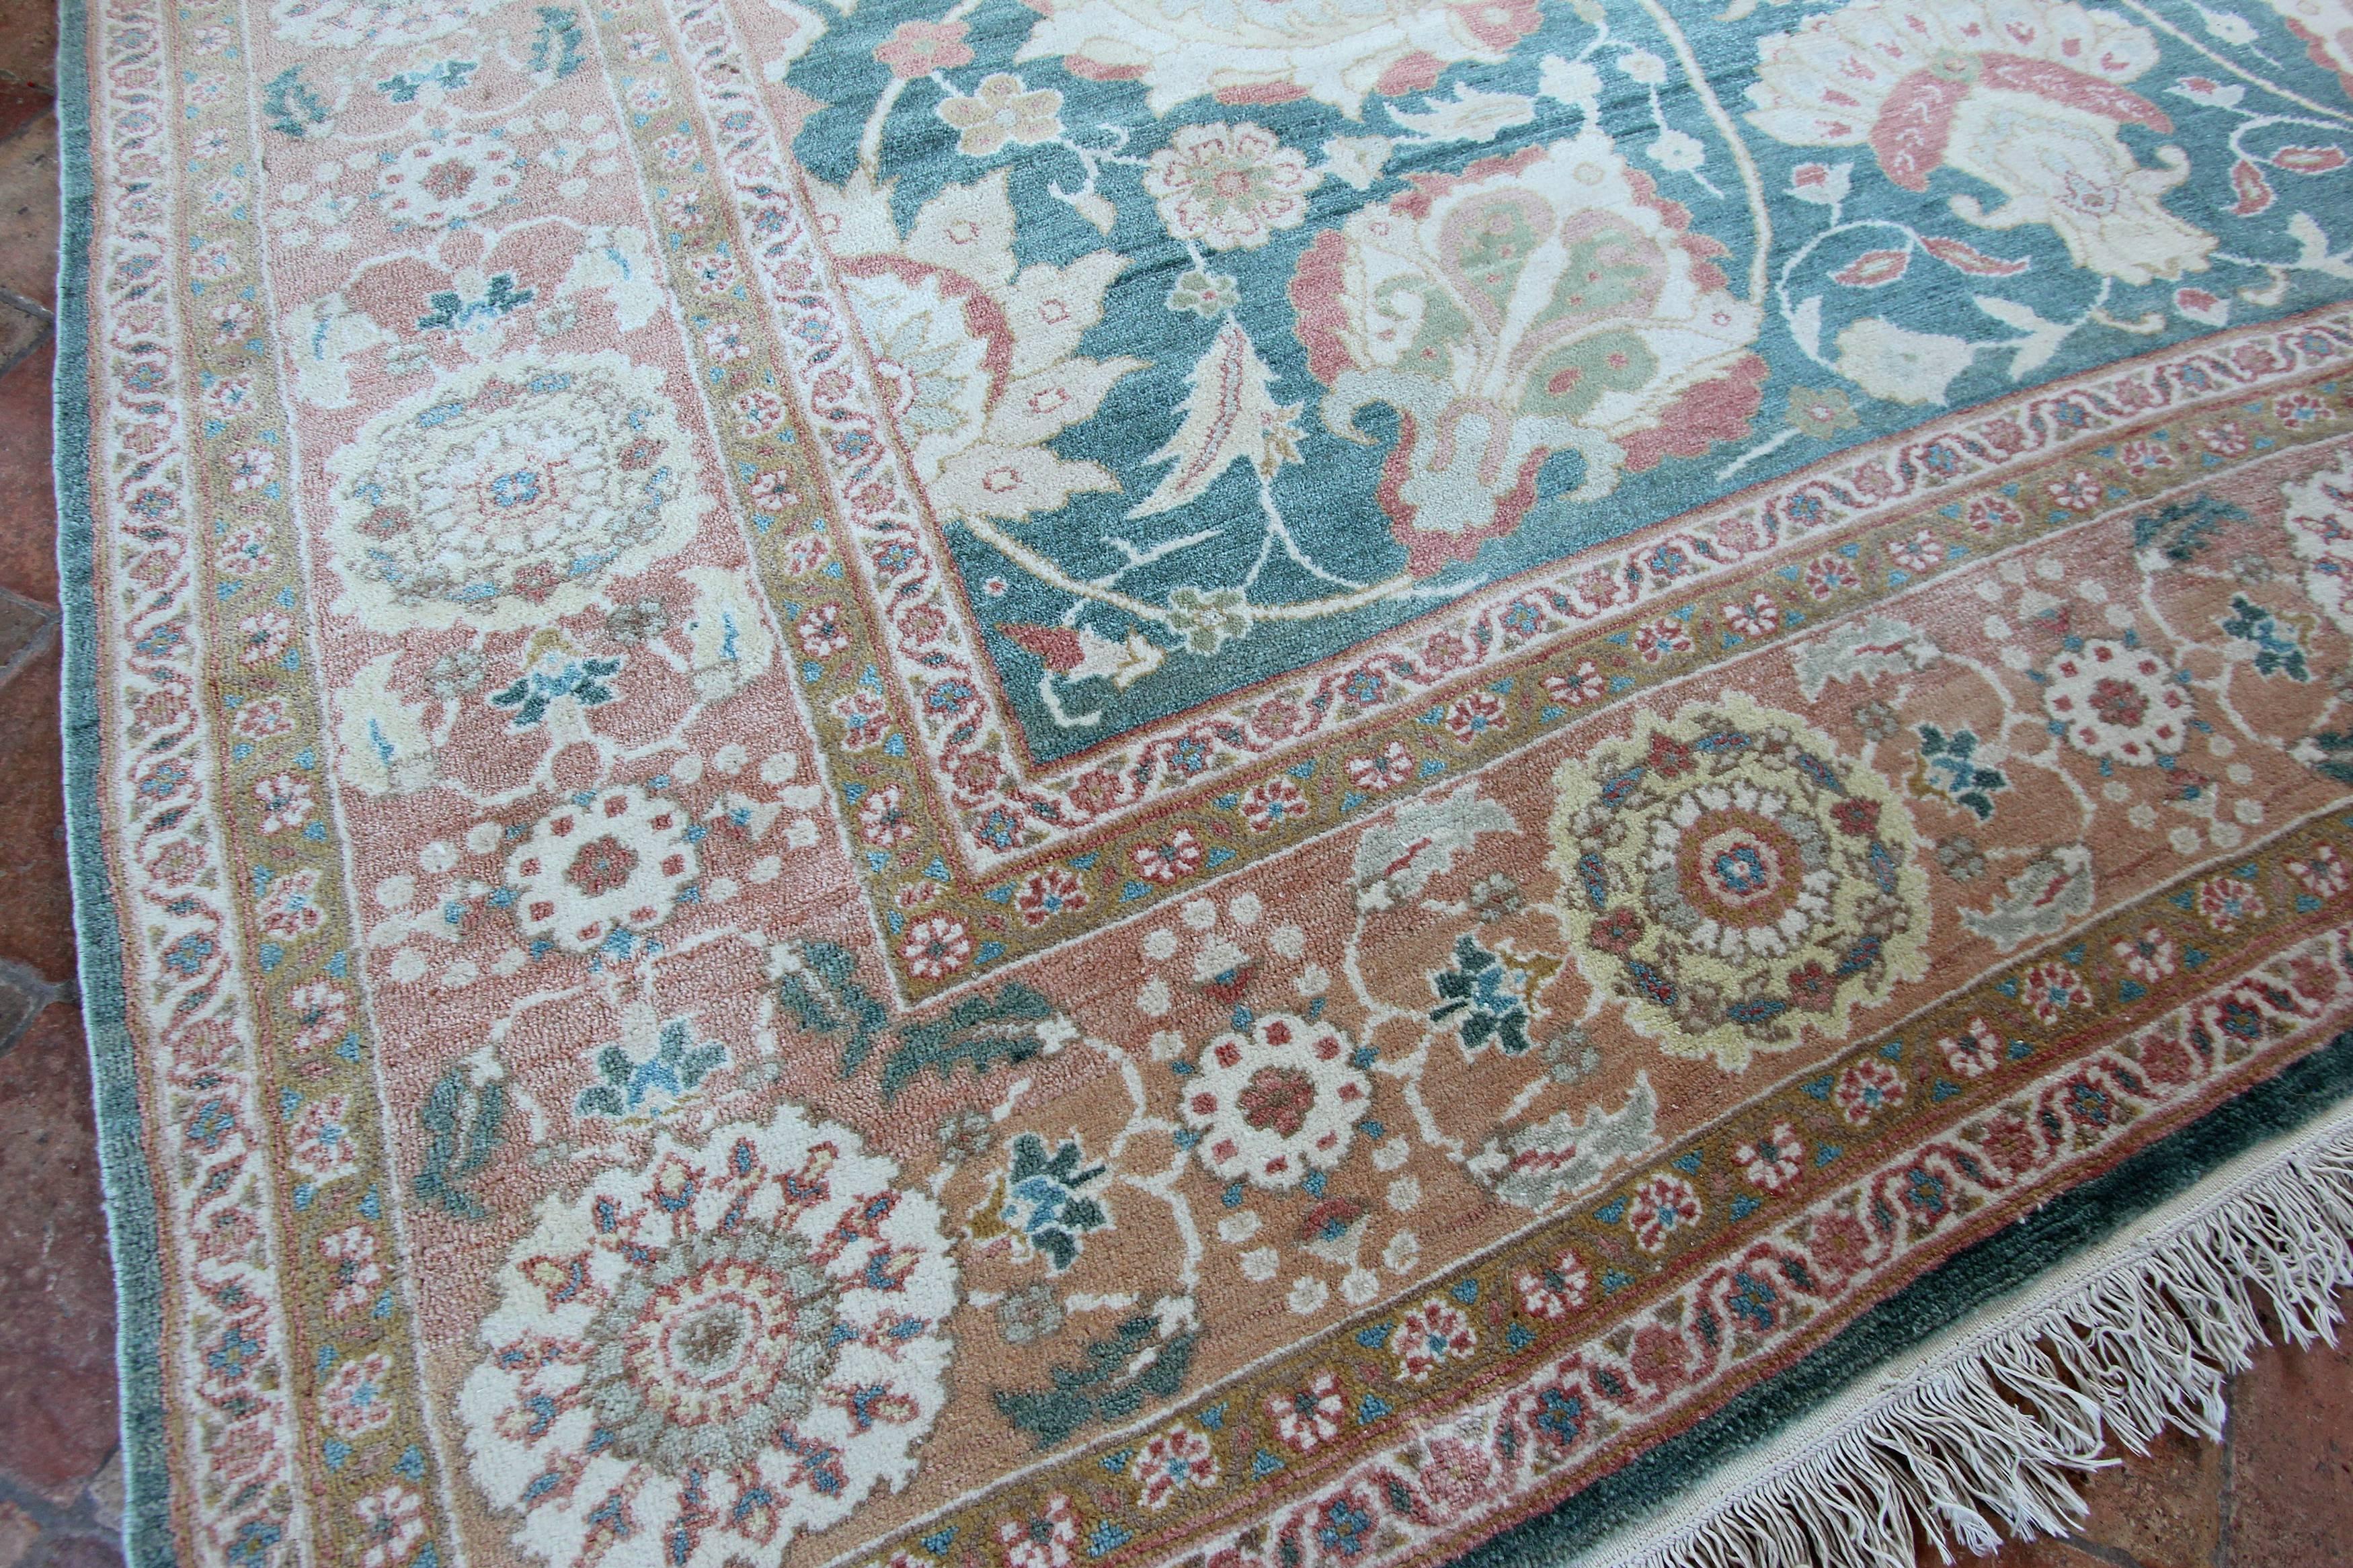 Modern Ziegler Carpet In Excellent Condition For Sale In Crondall, Surrey